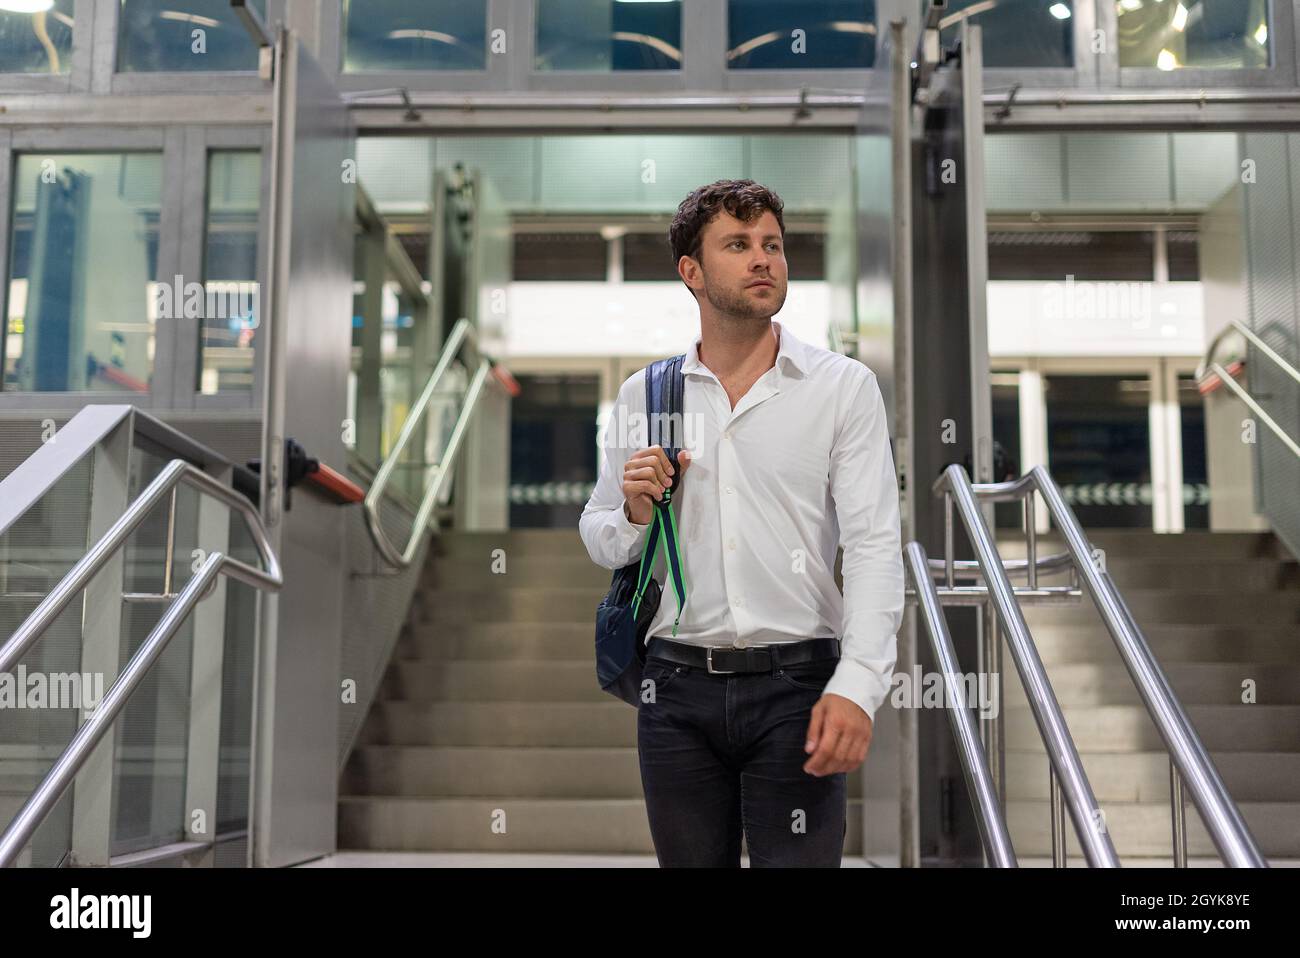 Male manager in smart casual clothes carrying bag and looking away while standing on stairs in airport during business trip Stock Photo